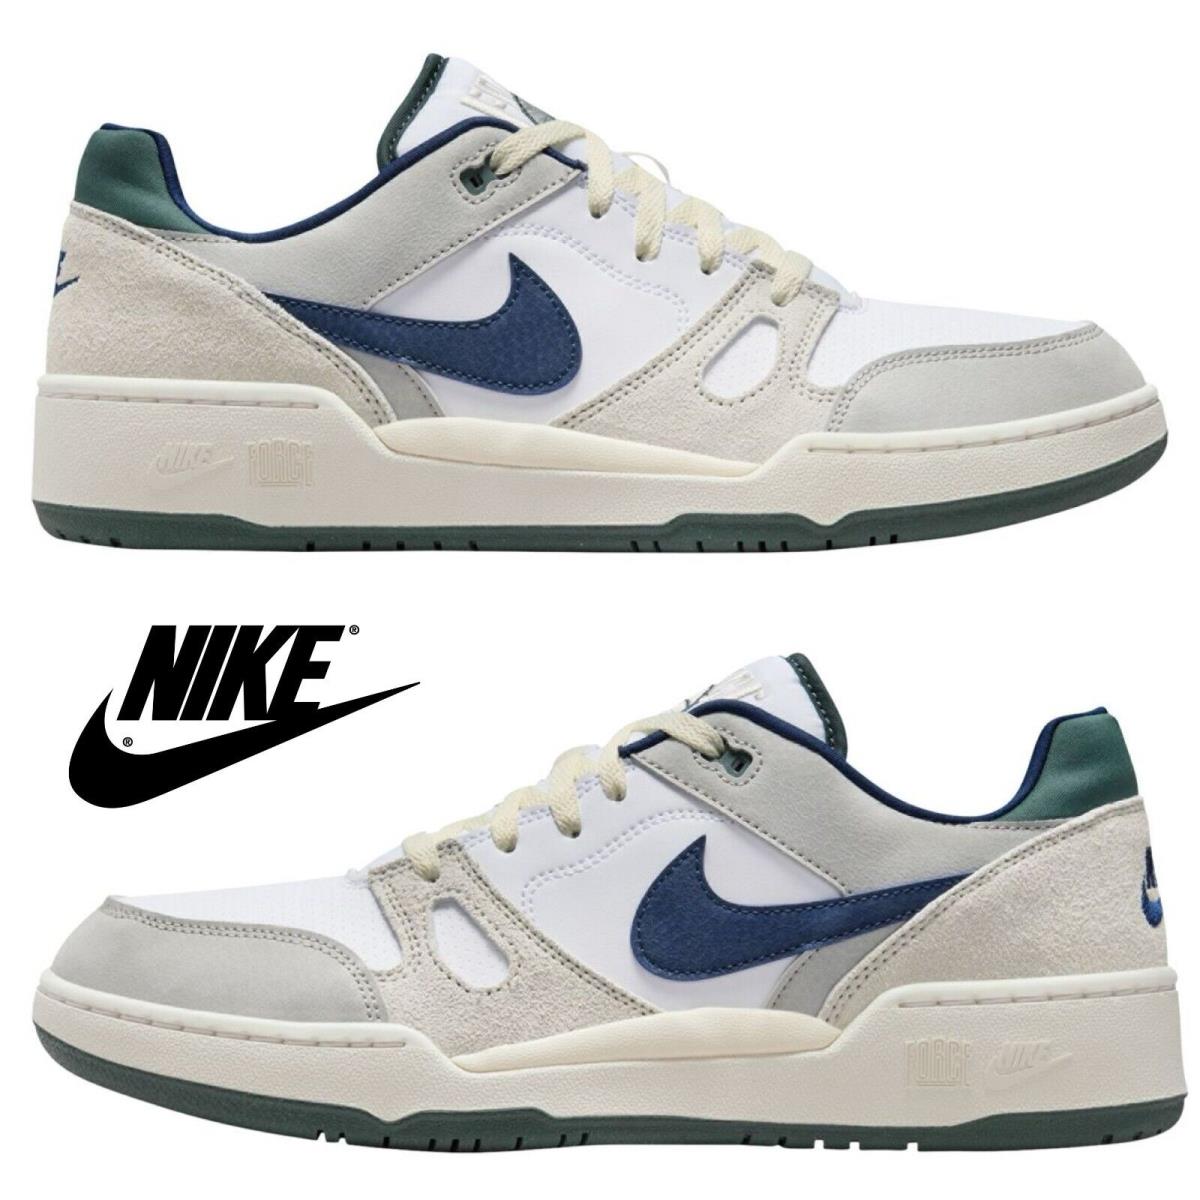 Nike Full Force Low Top Men`s Sneakers Sport Comfort Athletic Shoes White Blue - Black, Manufacturer: White/Green/Blue